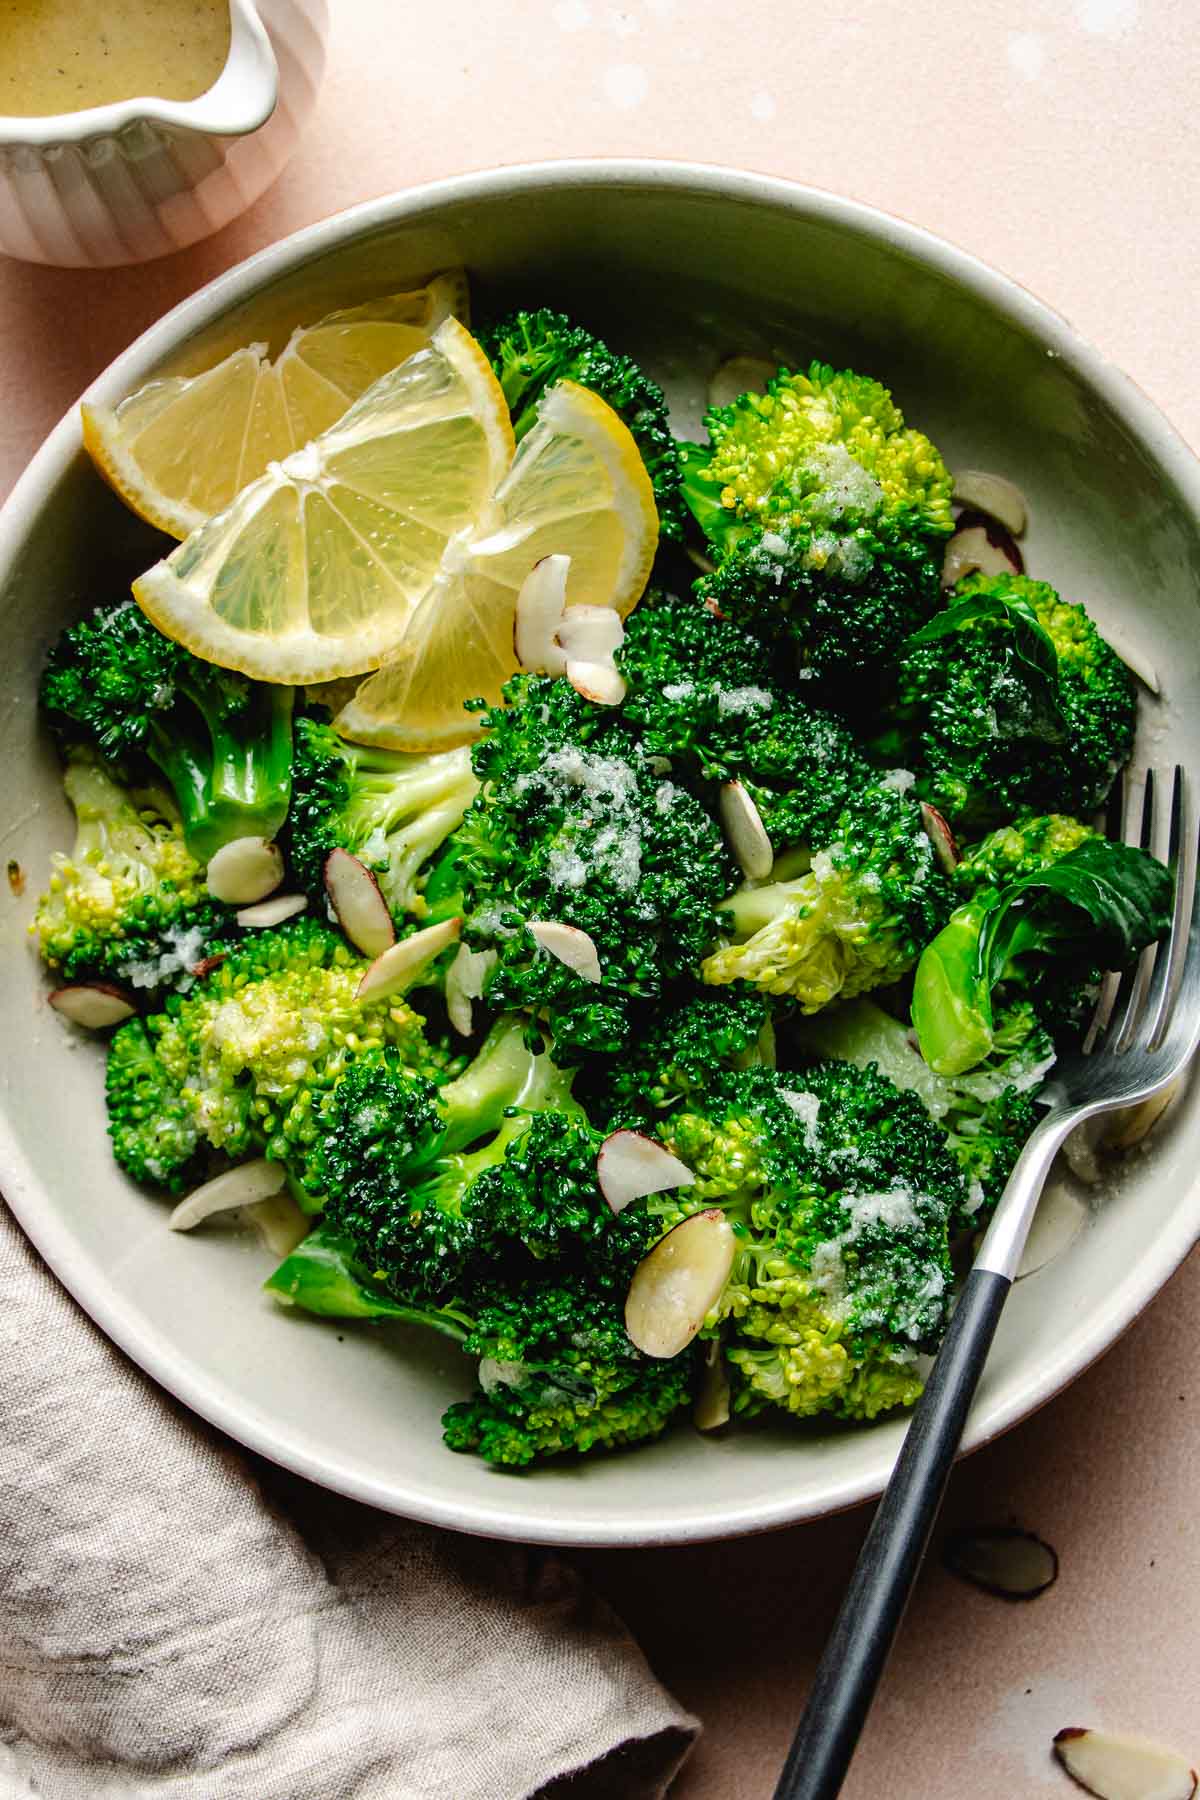 Image shows garlic butter ed broccoli served in a plate with lemon wedges on the side.